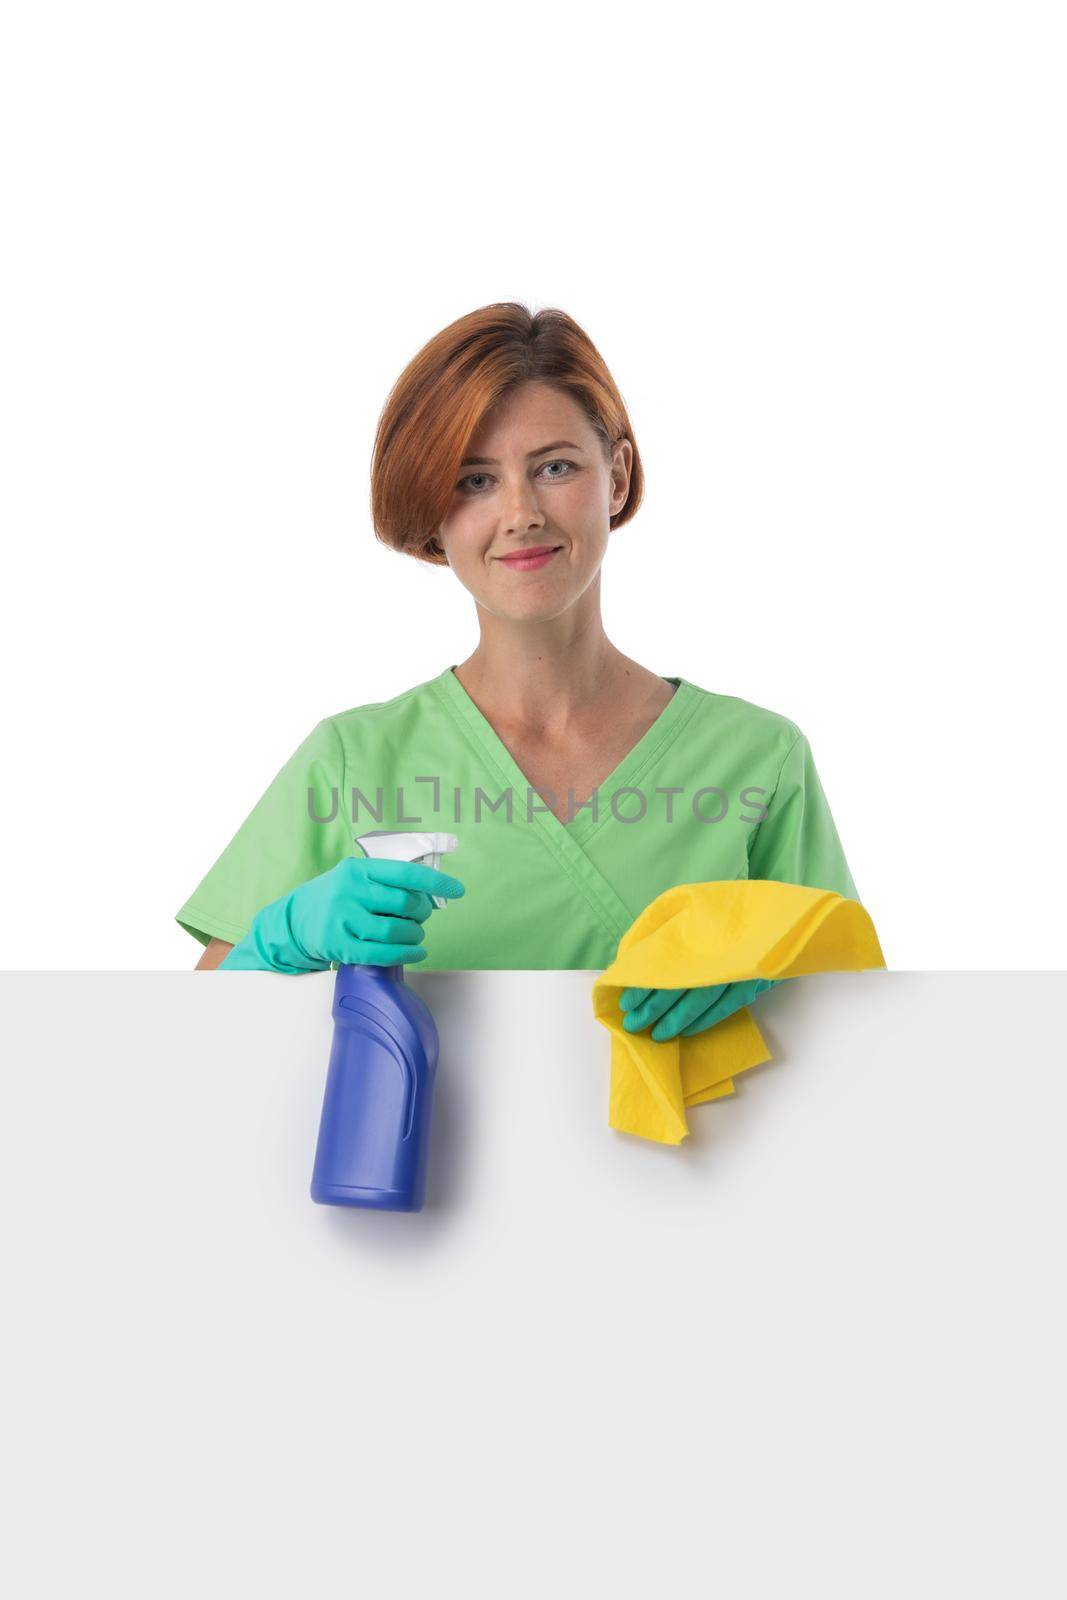 A woman cleaning lady with a rag in her hand holds an air freshener spray. House cleaning concept. Blank banner, isolated on white background